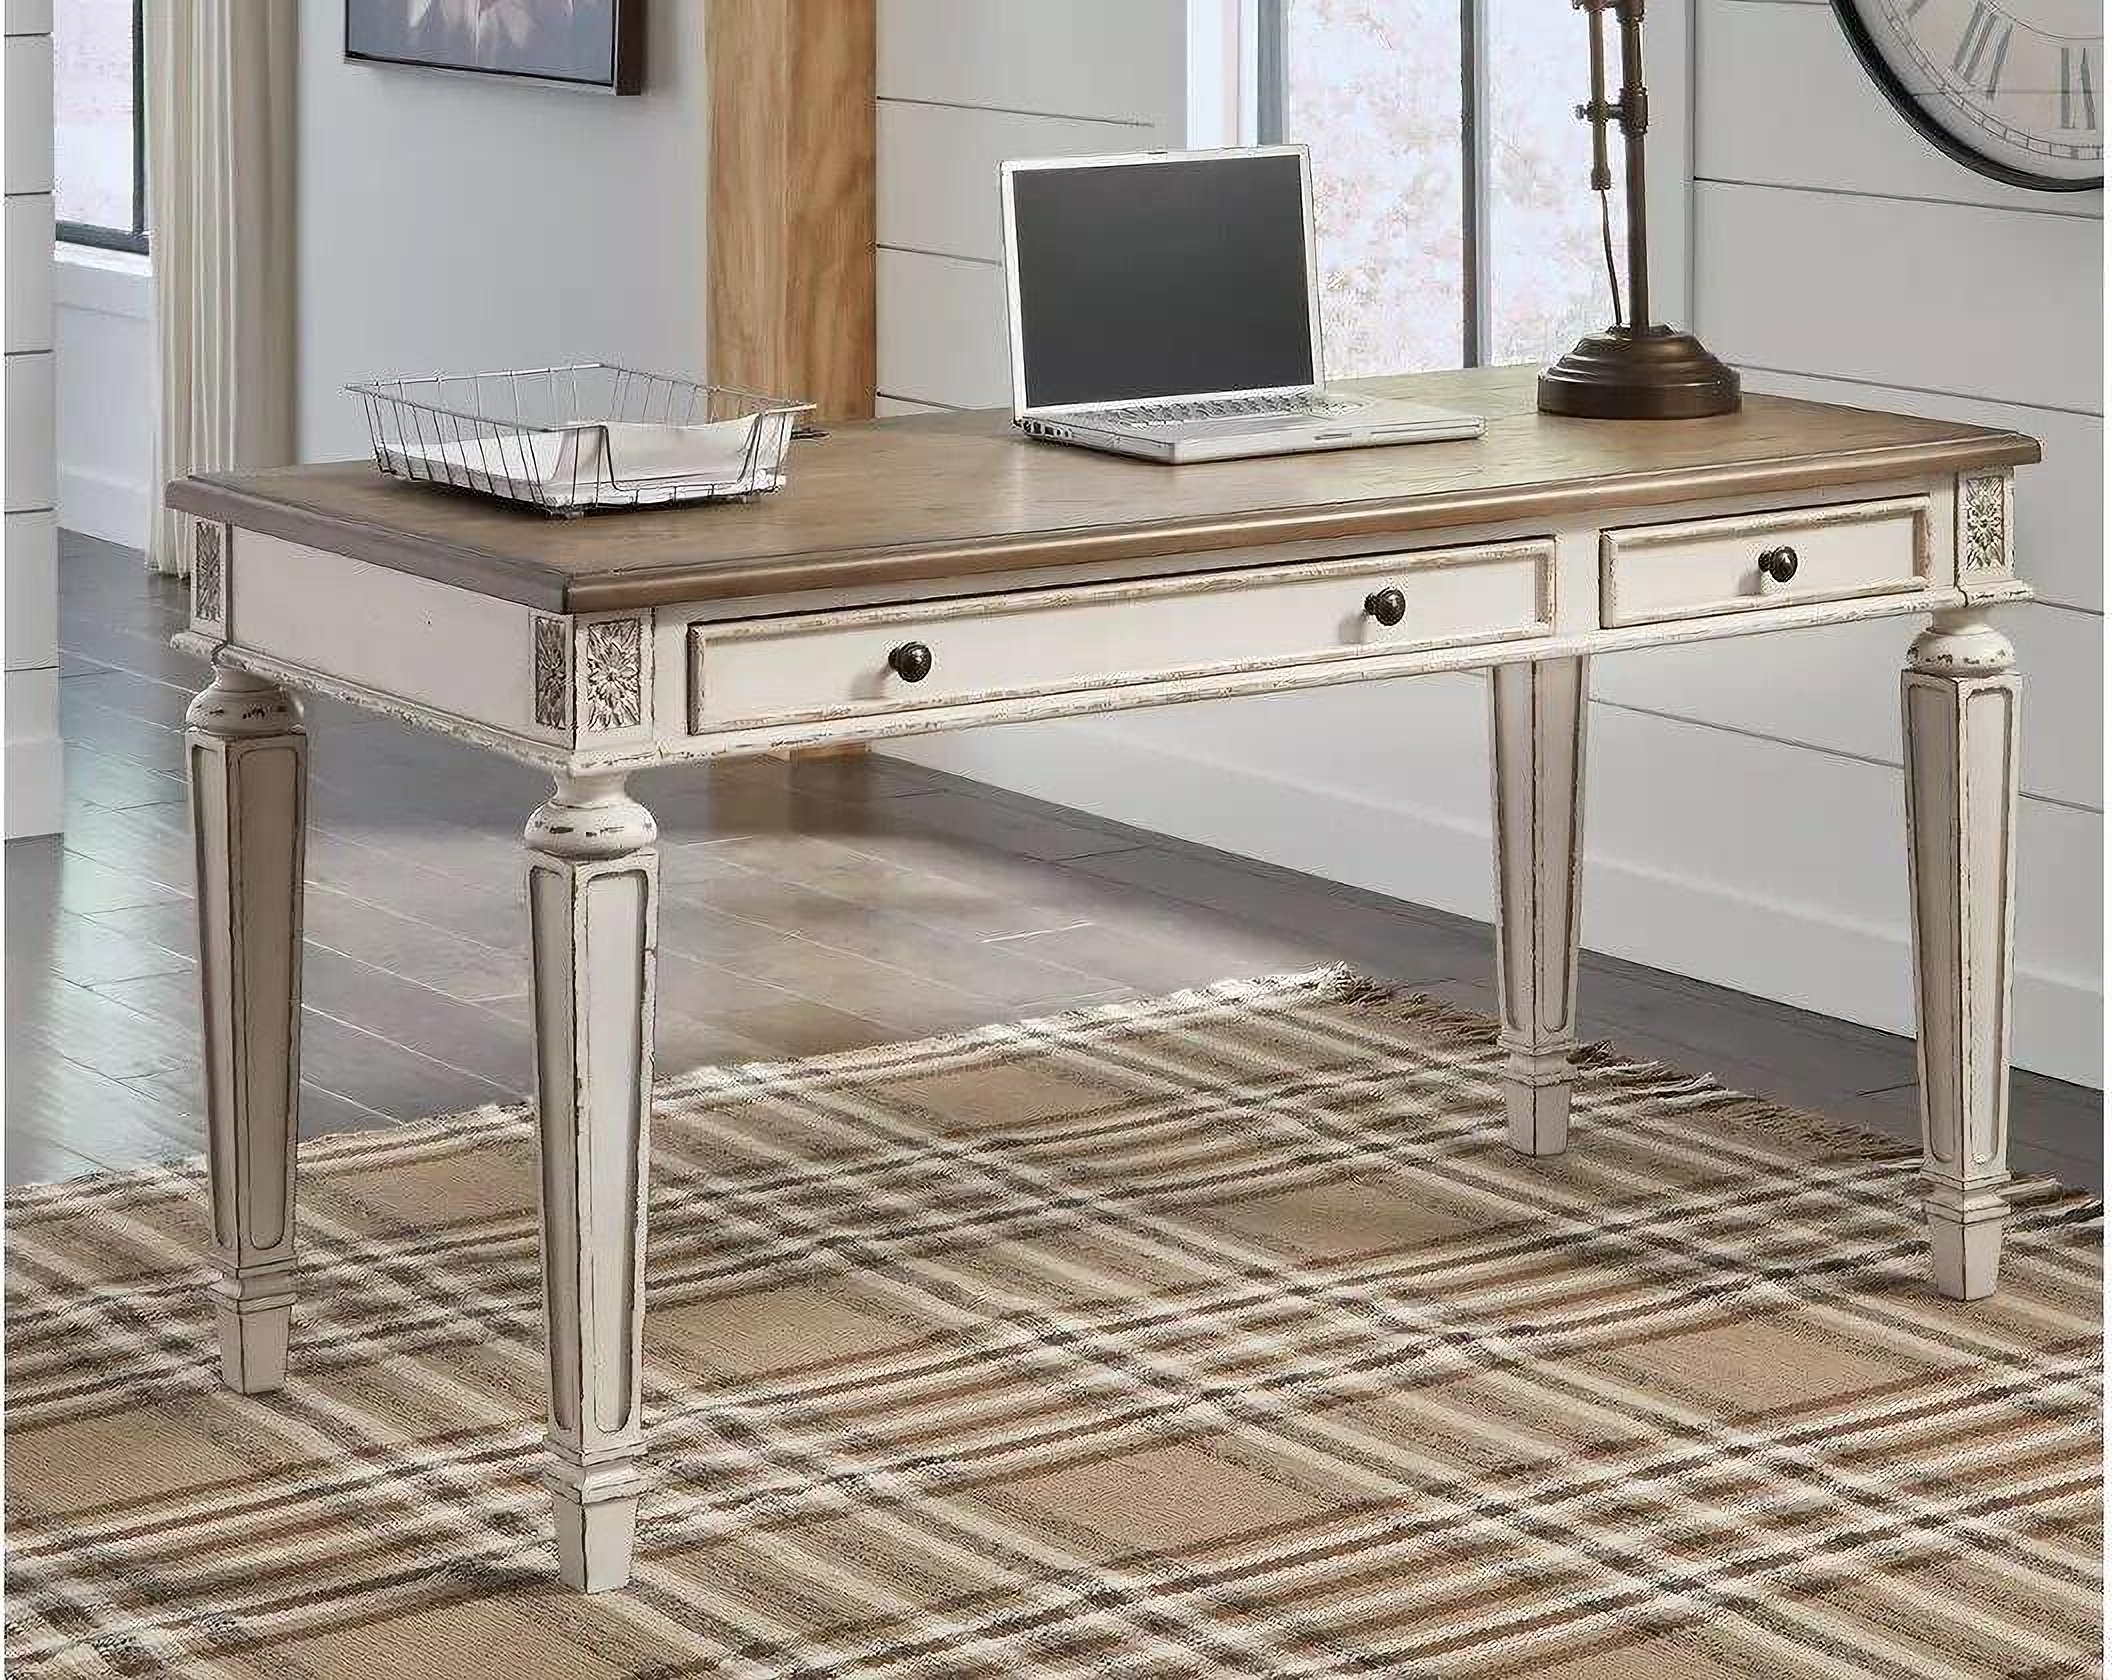 Signature Design by Ashley Bolanburg 60 in. Home Office Writing/Laptop Desk